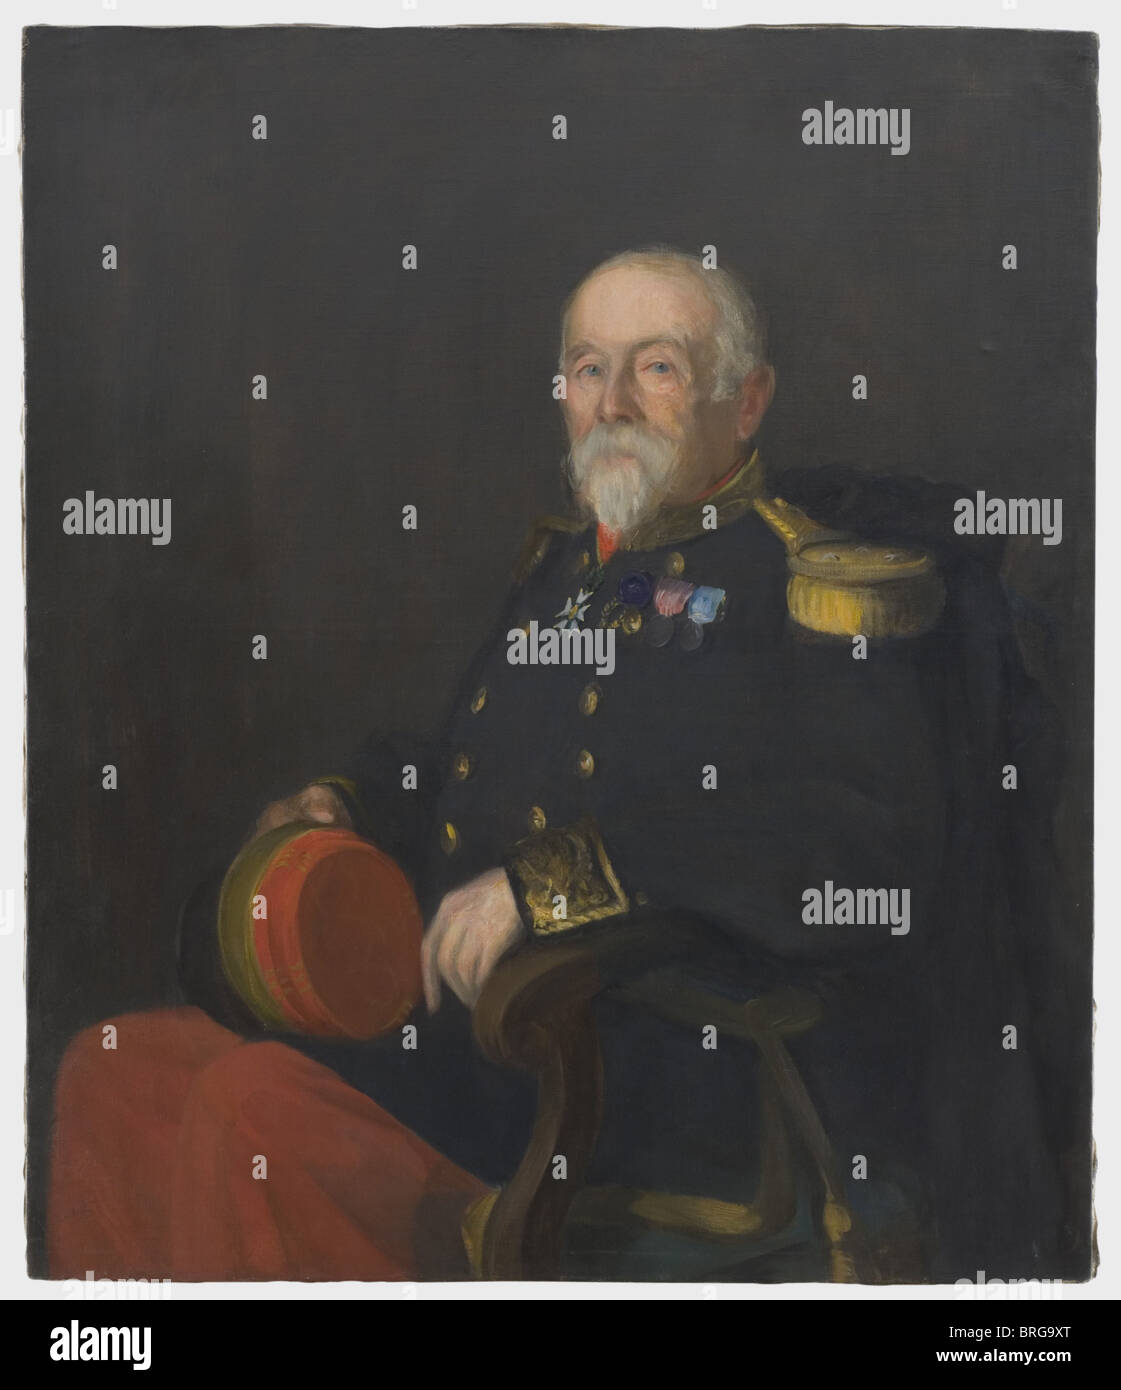 Leopold Leinweber (1861 - 1909), a portrait of General Saint-Cyr Louis Baron Nugues (1819 - 1900) Oil on canvas and stretcher frame. Half portrait of the seated general in uniform wearing the Commander's Cross of the Order of the Legion of Honour. On verso of stretcher old label 'Leo Leinweber... Le Général Comte Nugues'. 121 x 100 cm. General Nugues, for several years General Montebello's wing adjutant, became Colonel in 1869. In the war of 1870/71 he was a member of Marechal Bazaine's general staff and became Brigade General in 1875. Leopold Leinweber, painte, Stock Photo